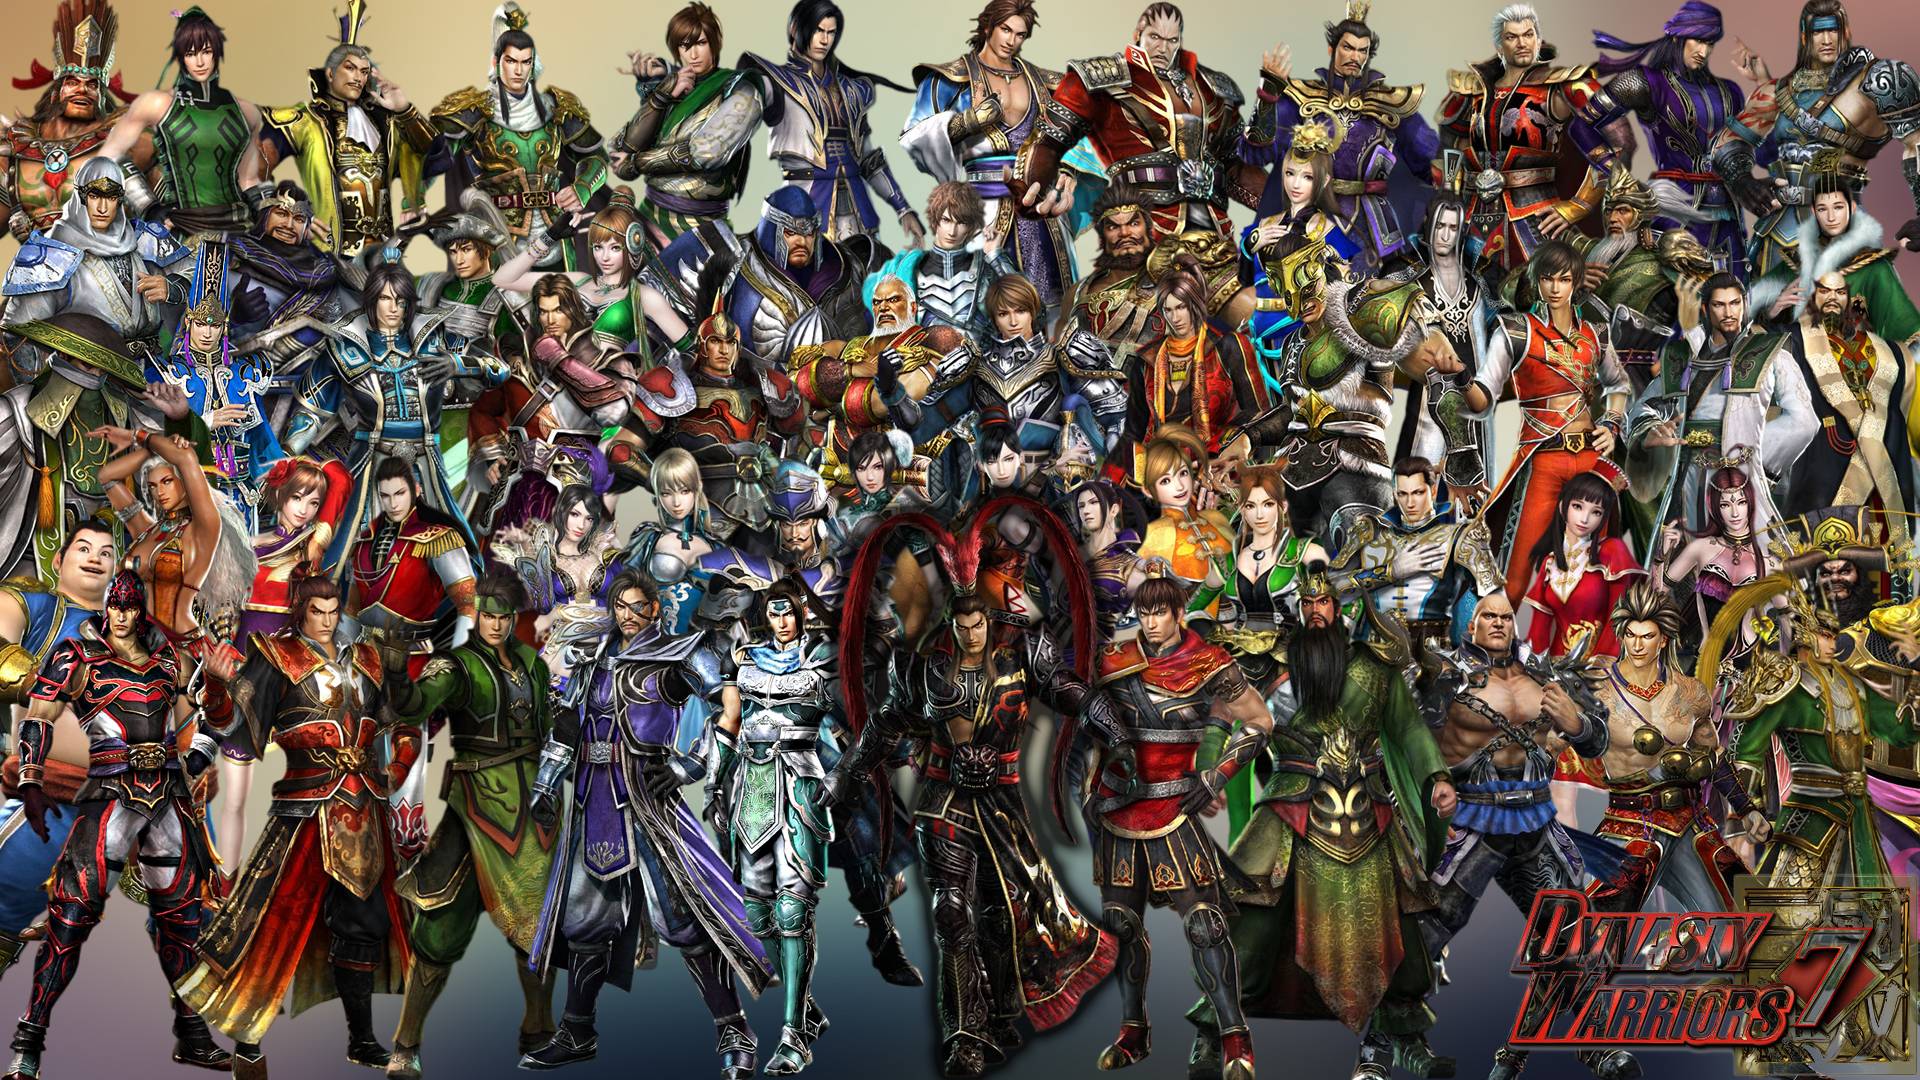 Download Dynasty Warriors 7 (9787) Full Size. Free Game Wallpaper HD